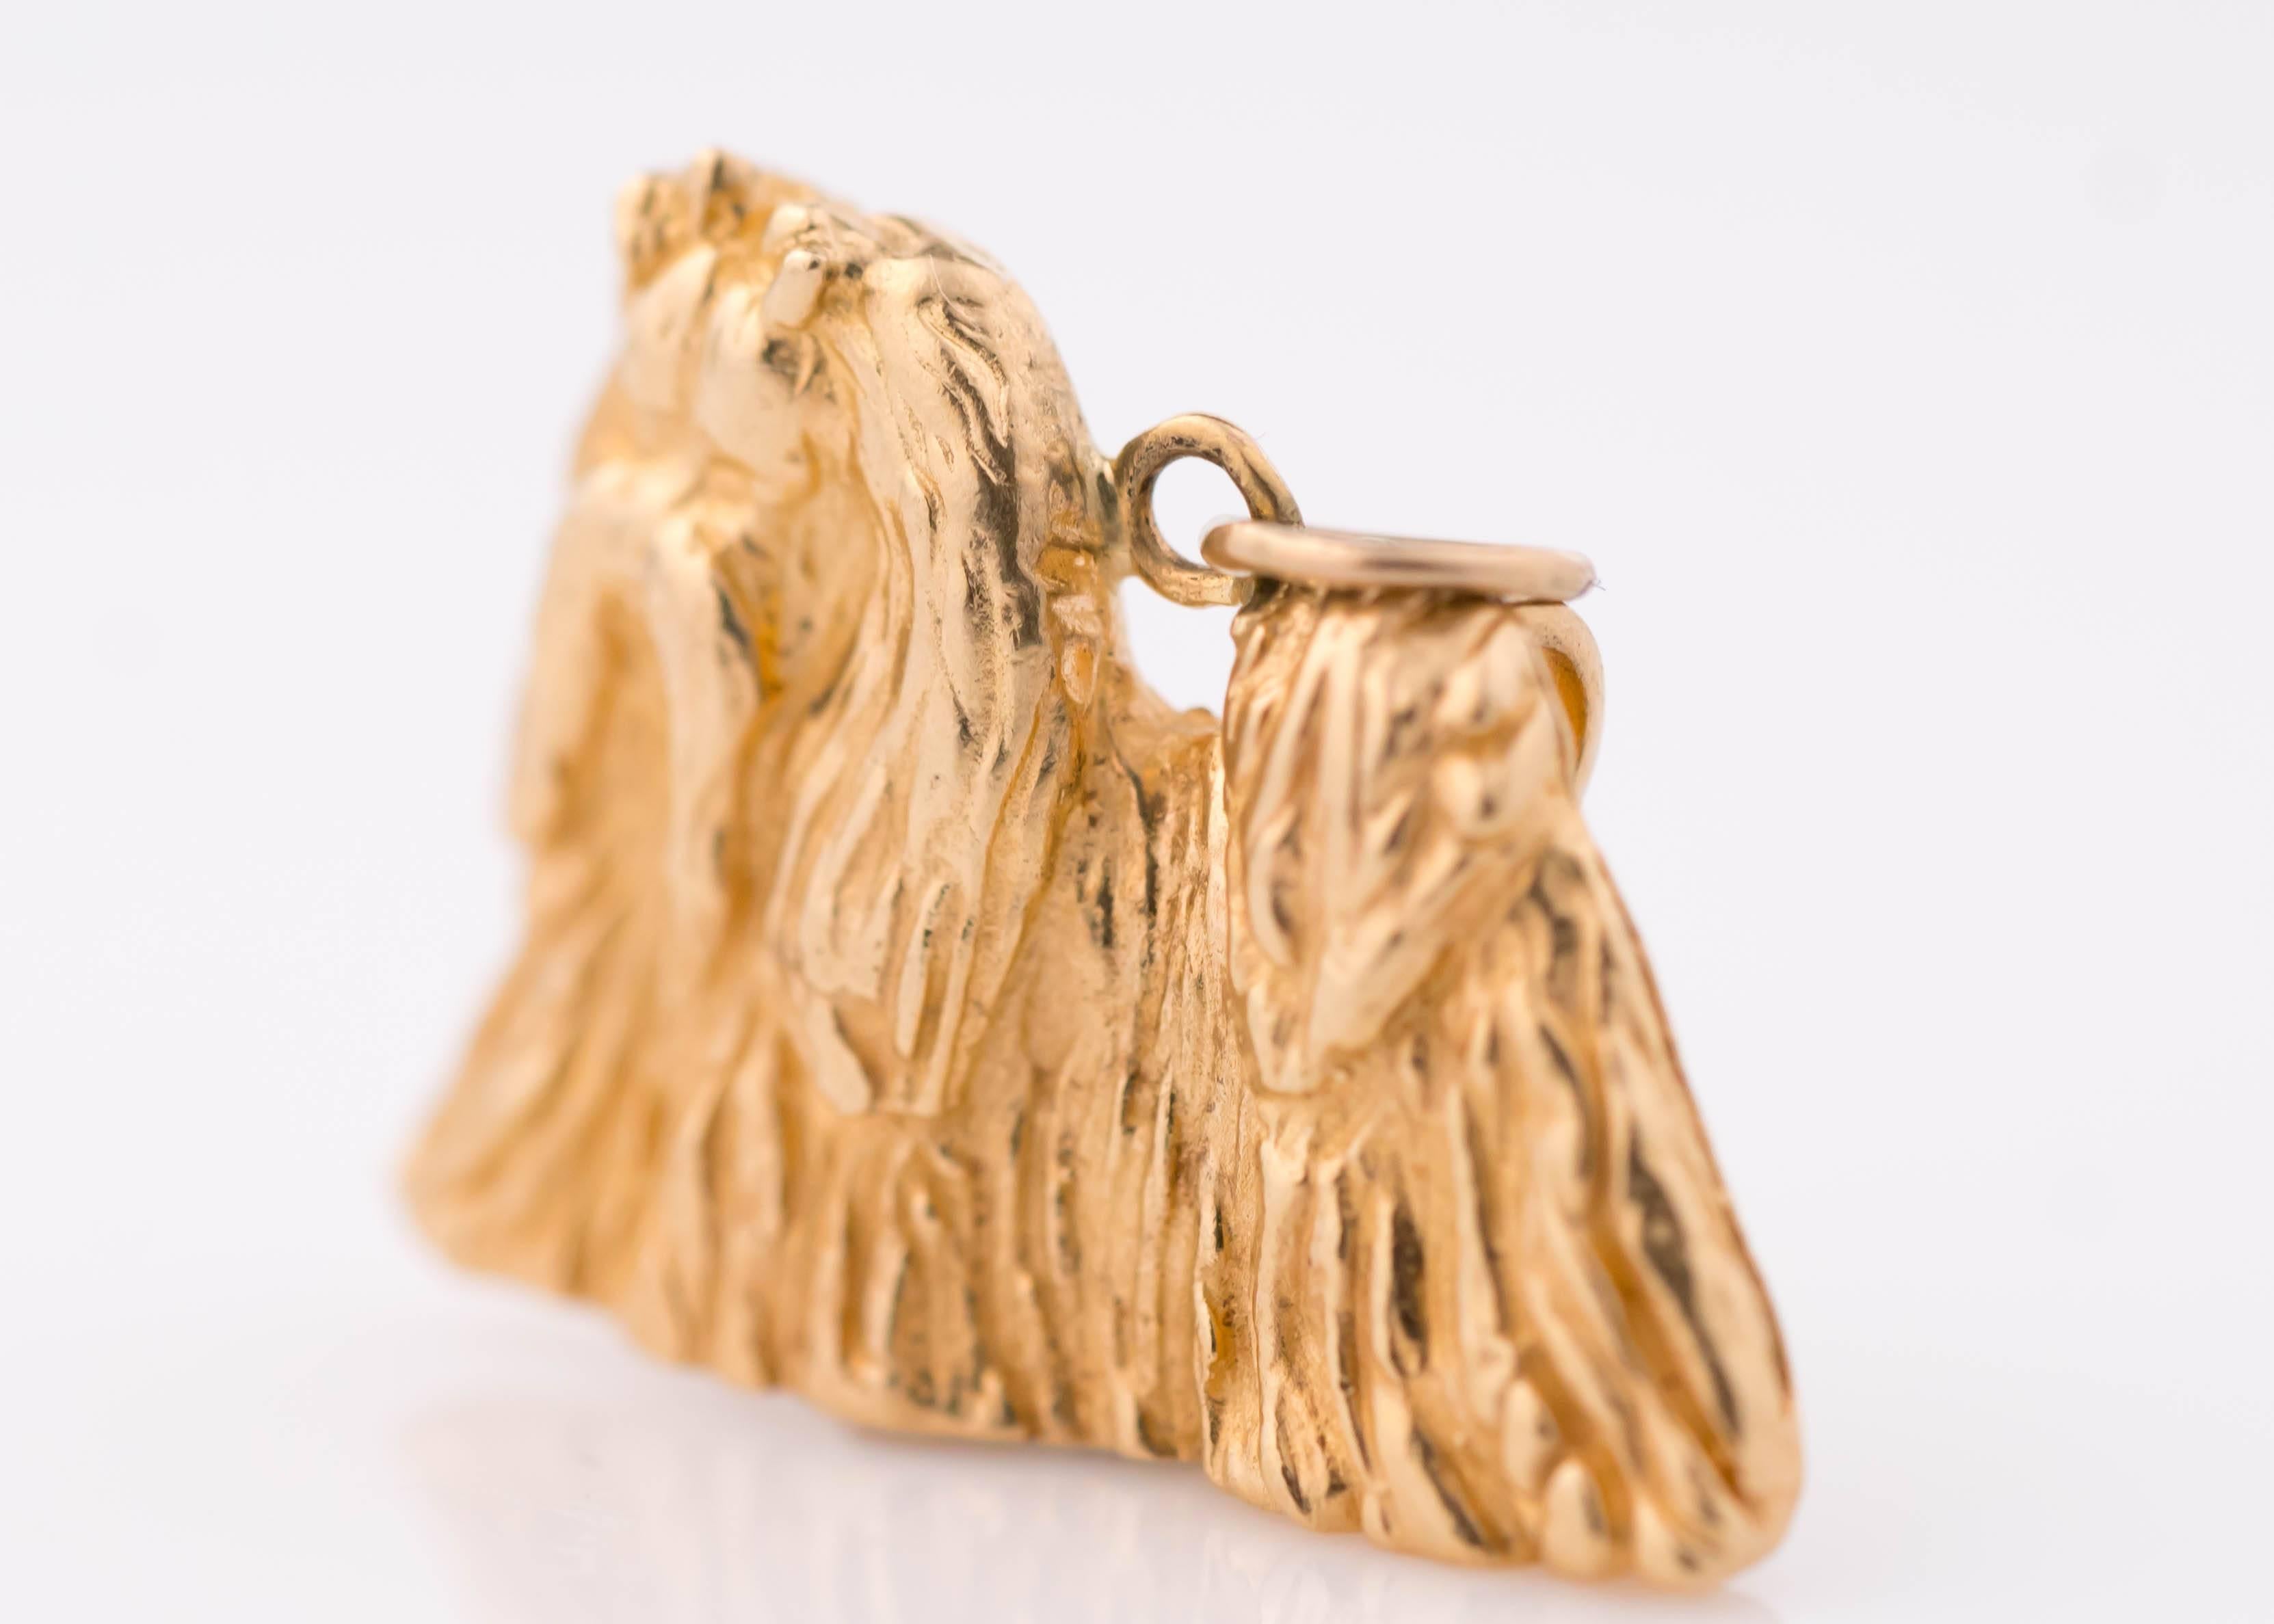 1980s Maltese or Yorkshire Terrier Dog Charm Pendant crafted in 14 Karat Yellow Gold

This Show Dog quality Dog Pendant is highly detailed. The 14K Gold is finely textured to show the long, silky, luxurious hair. The tail drapes gracefully over the